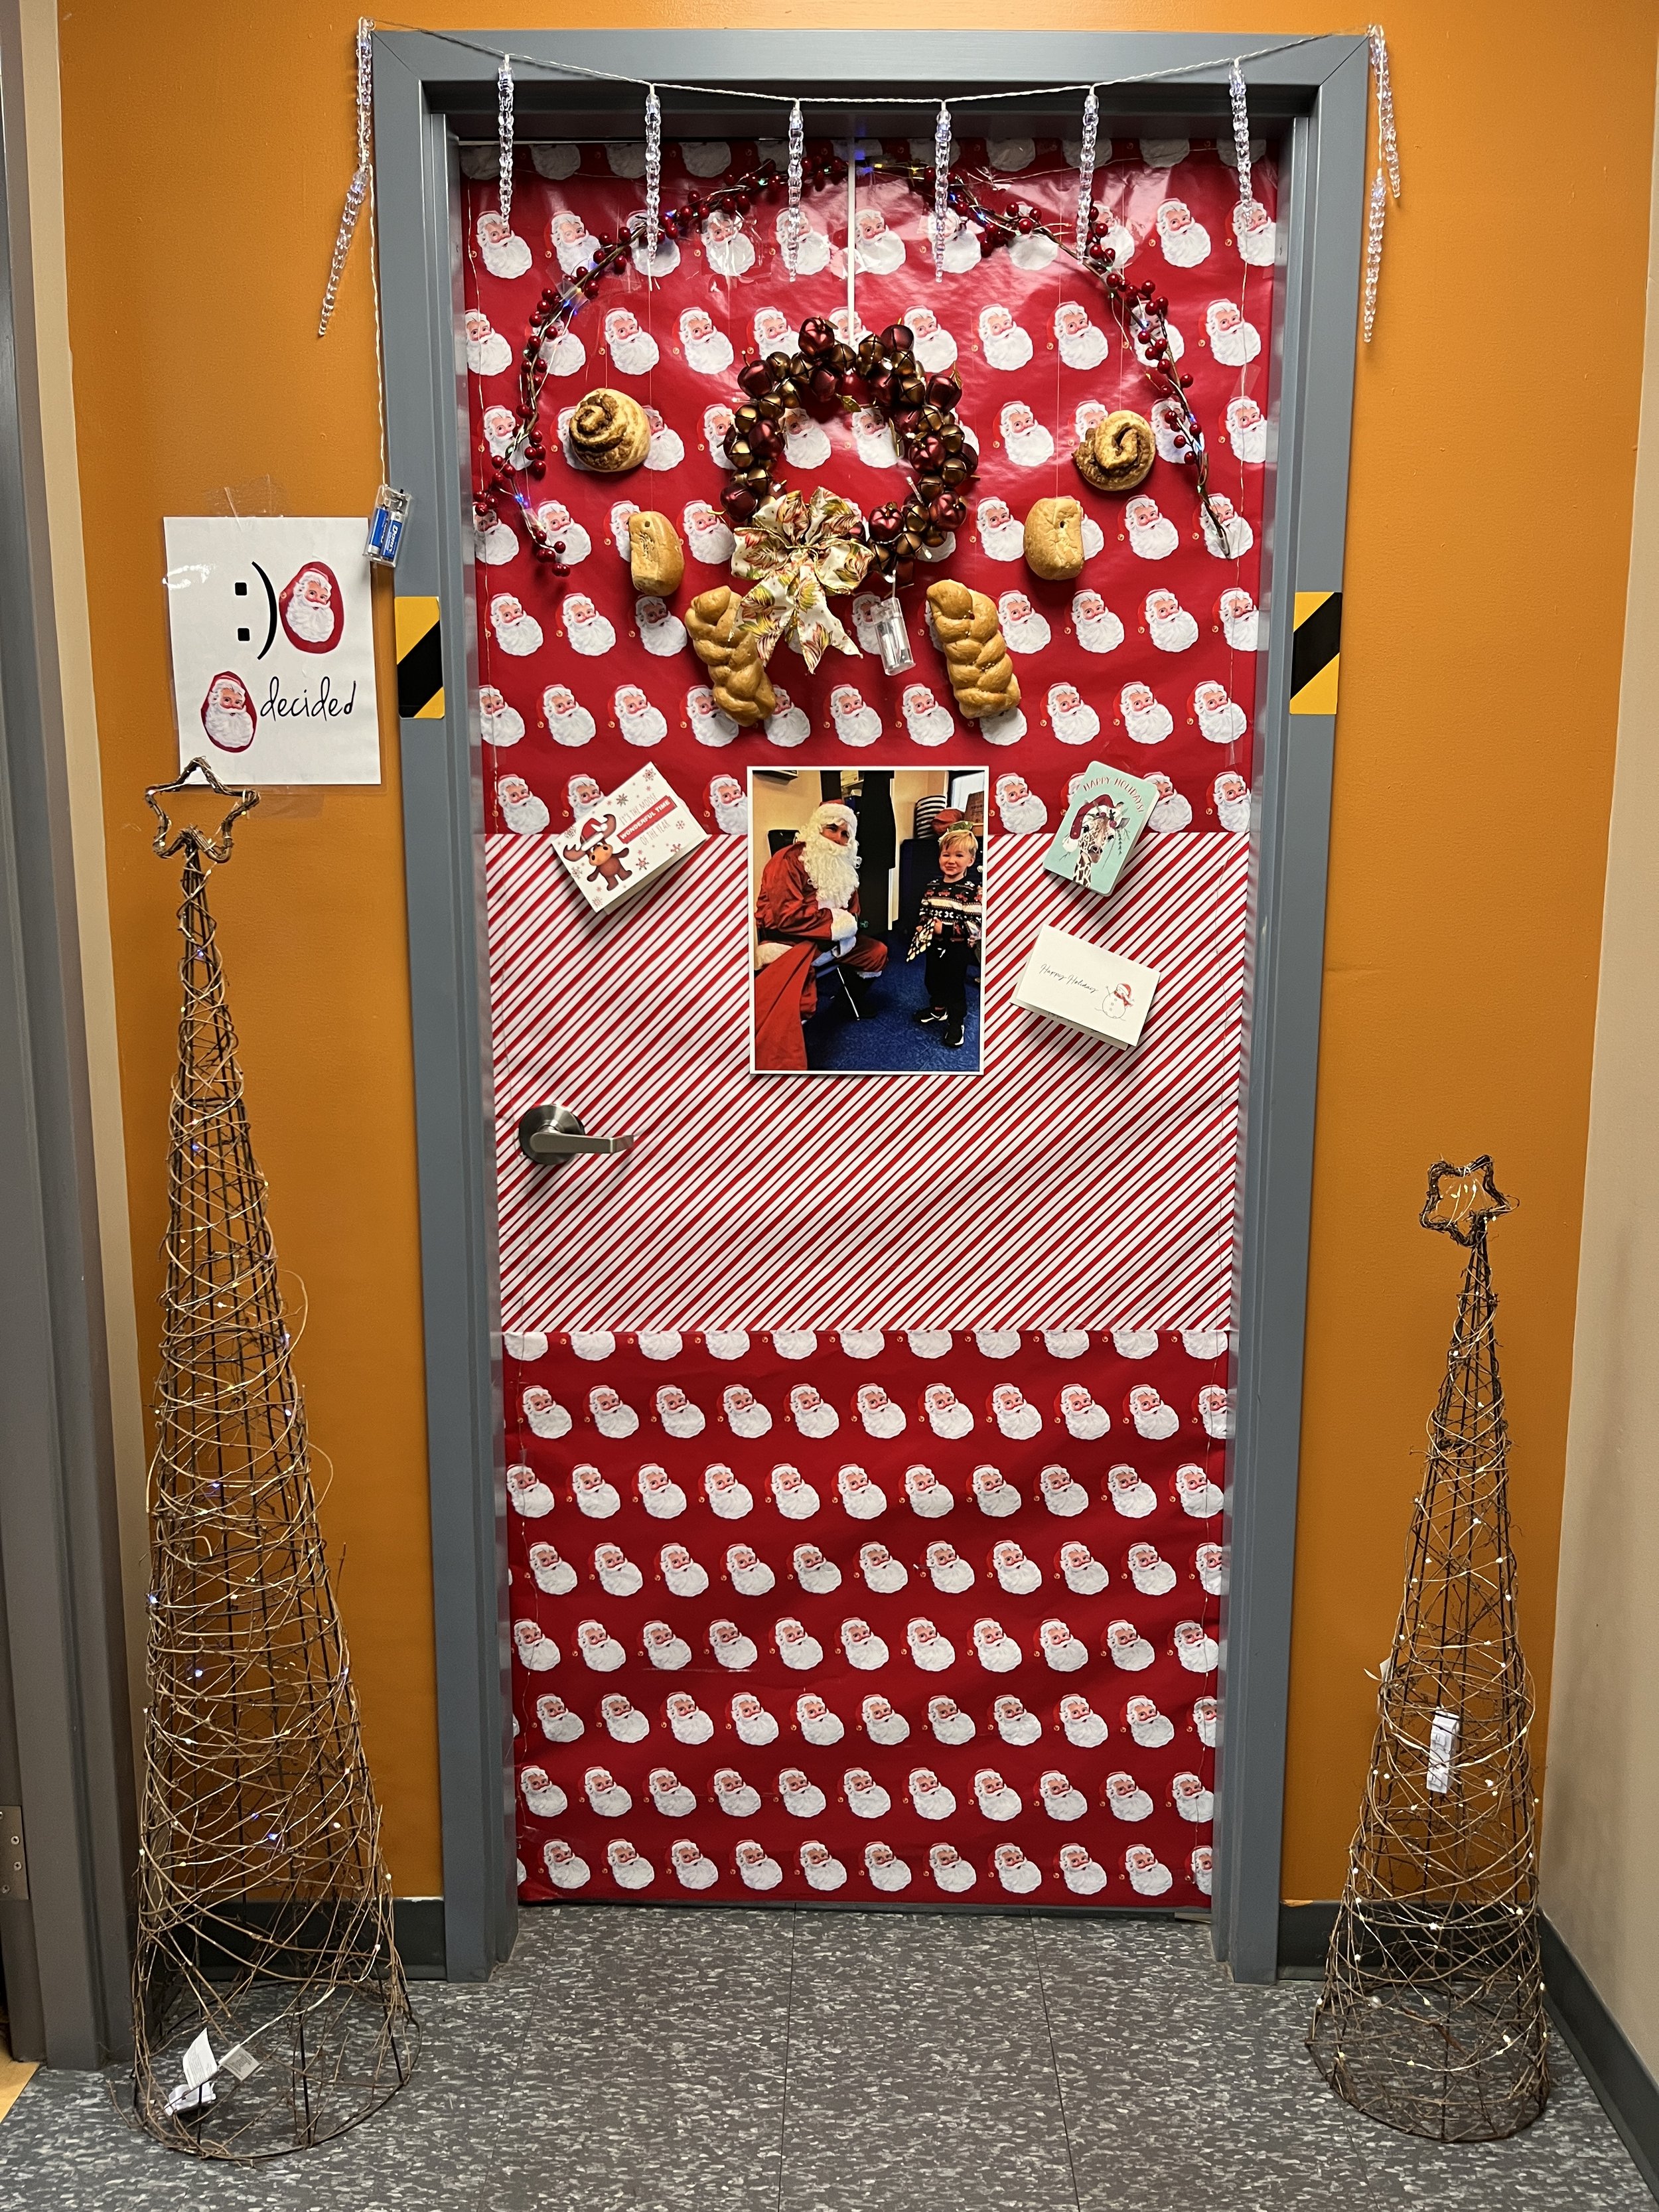 And a special mention to the Runner-up: Stone Hearth Bakery Door!